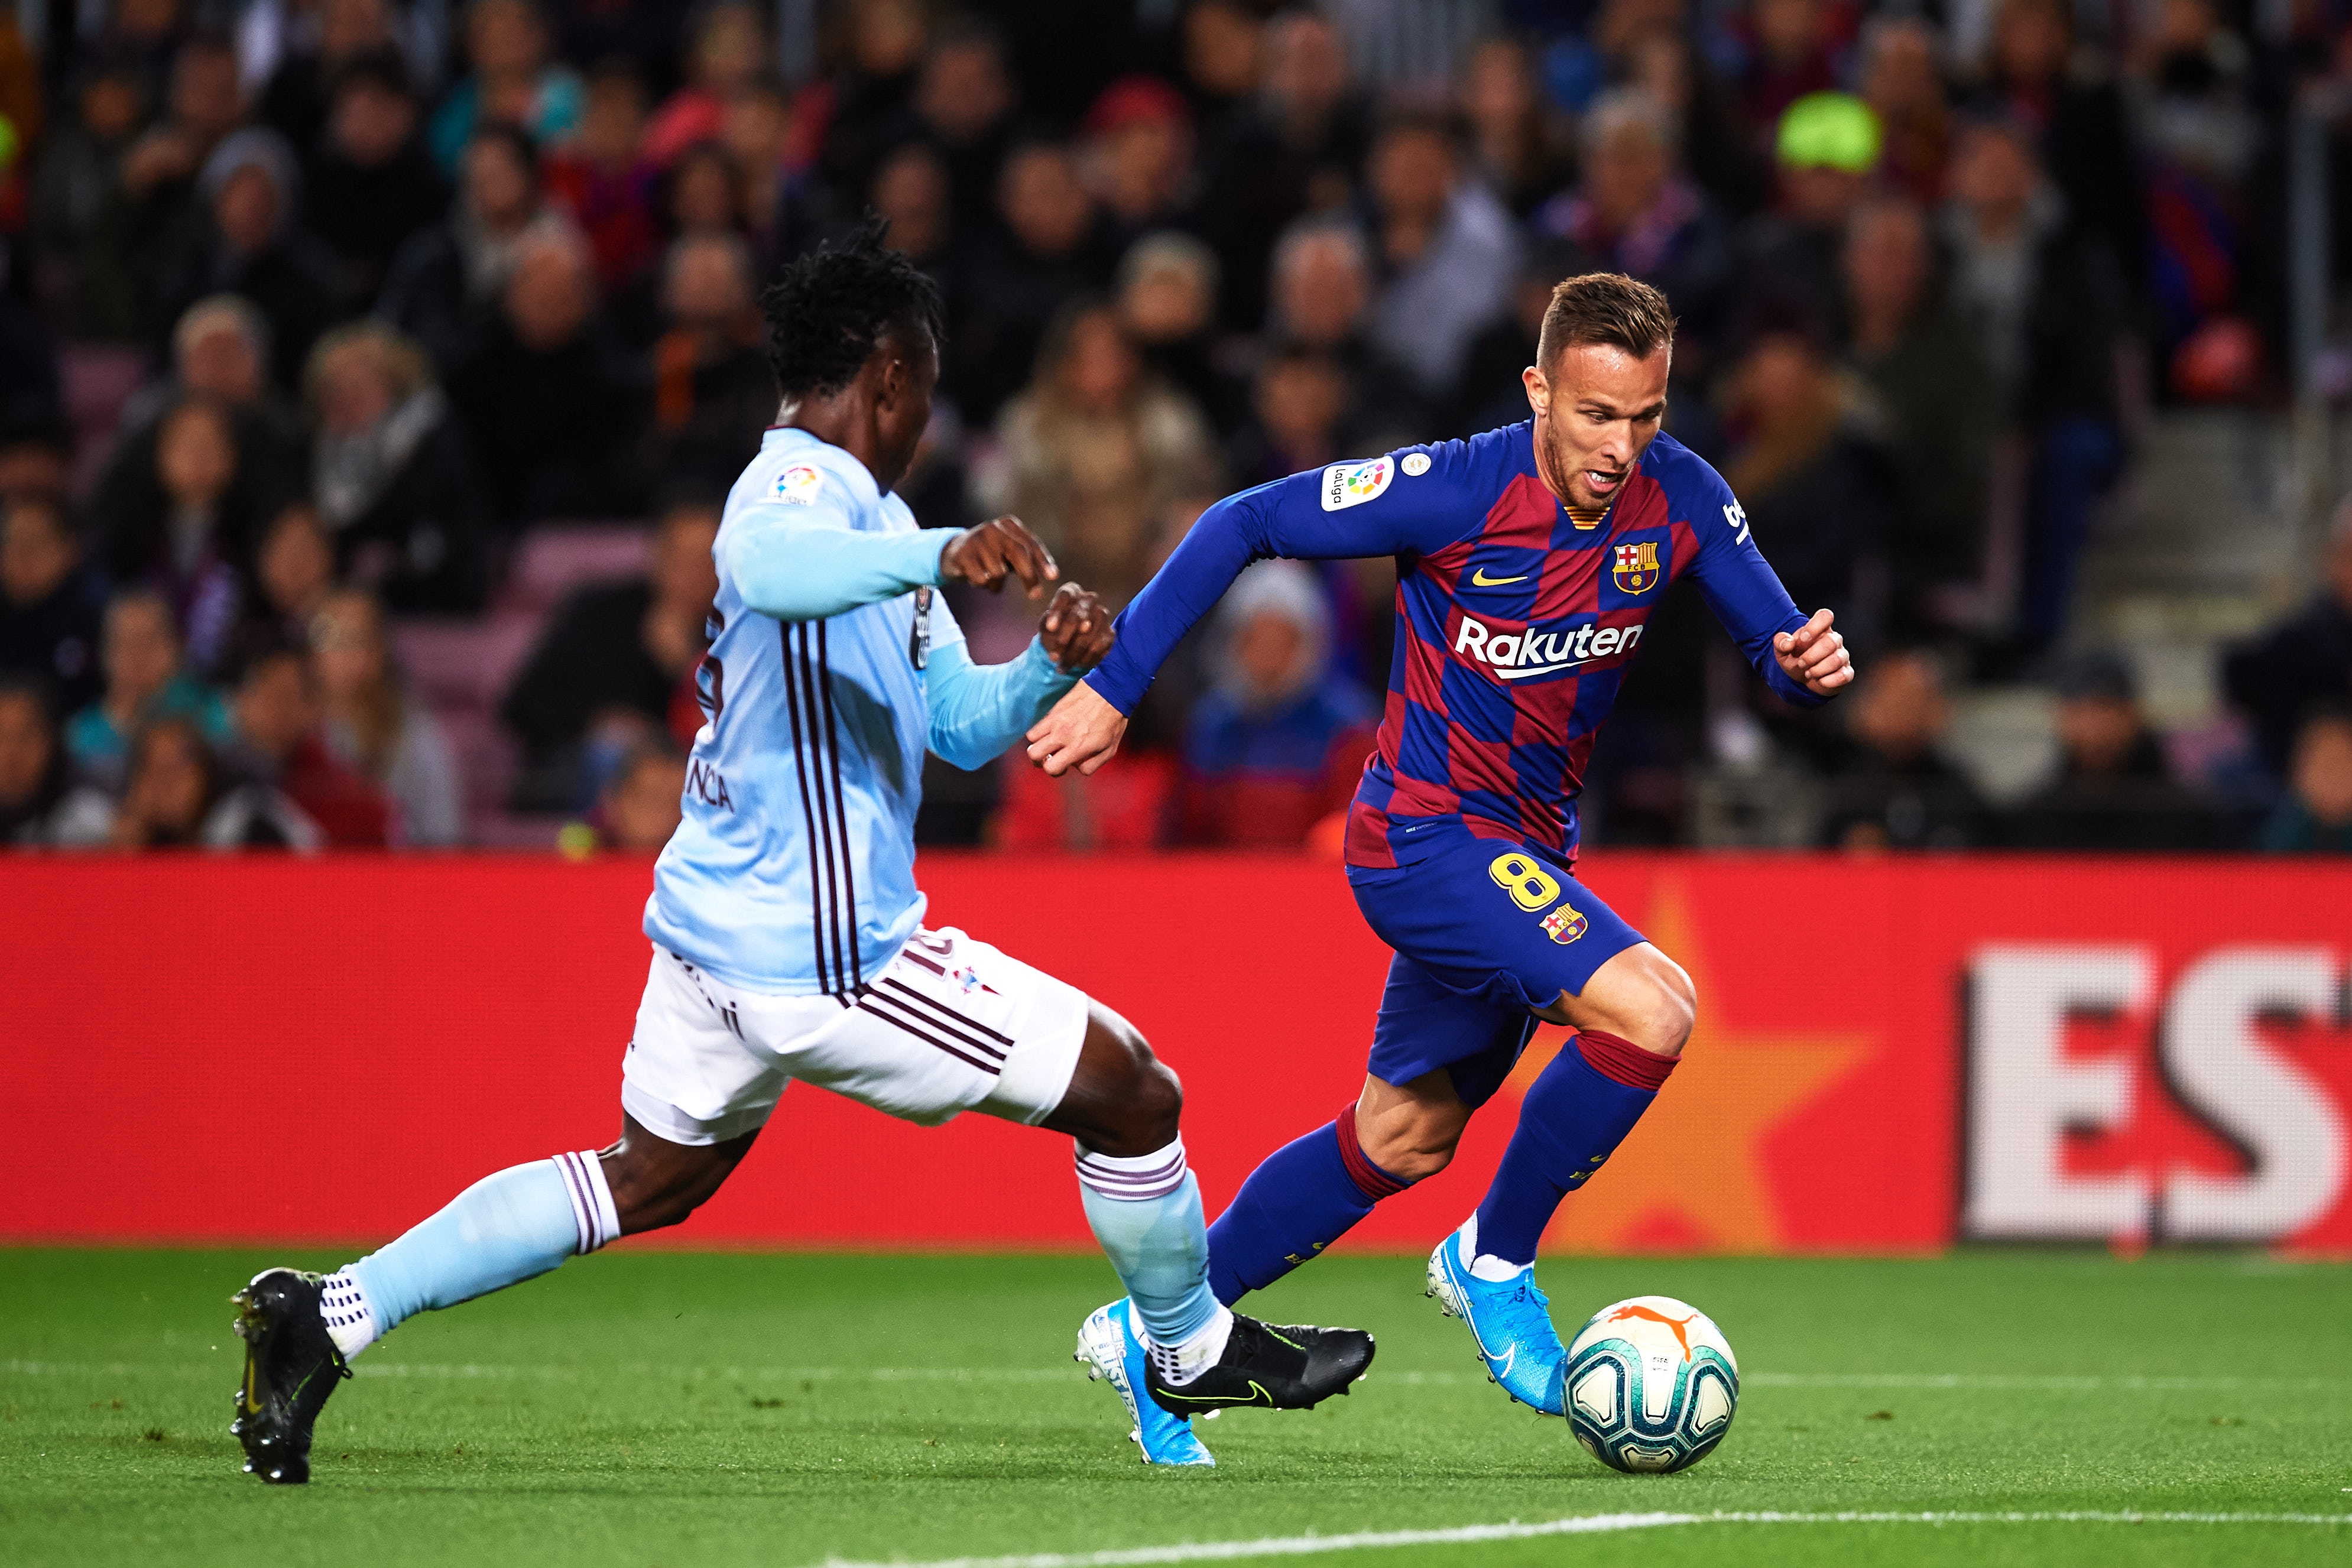 Arthur impressed on his return to the side (Photo by Alex Caparros/Getty Images)